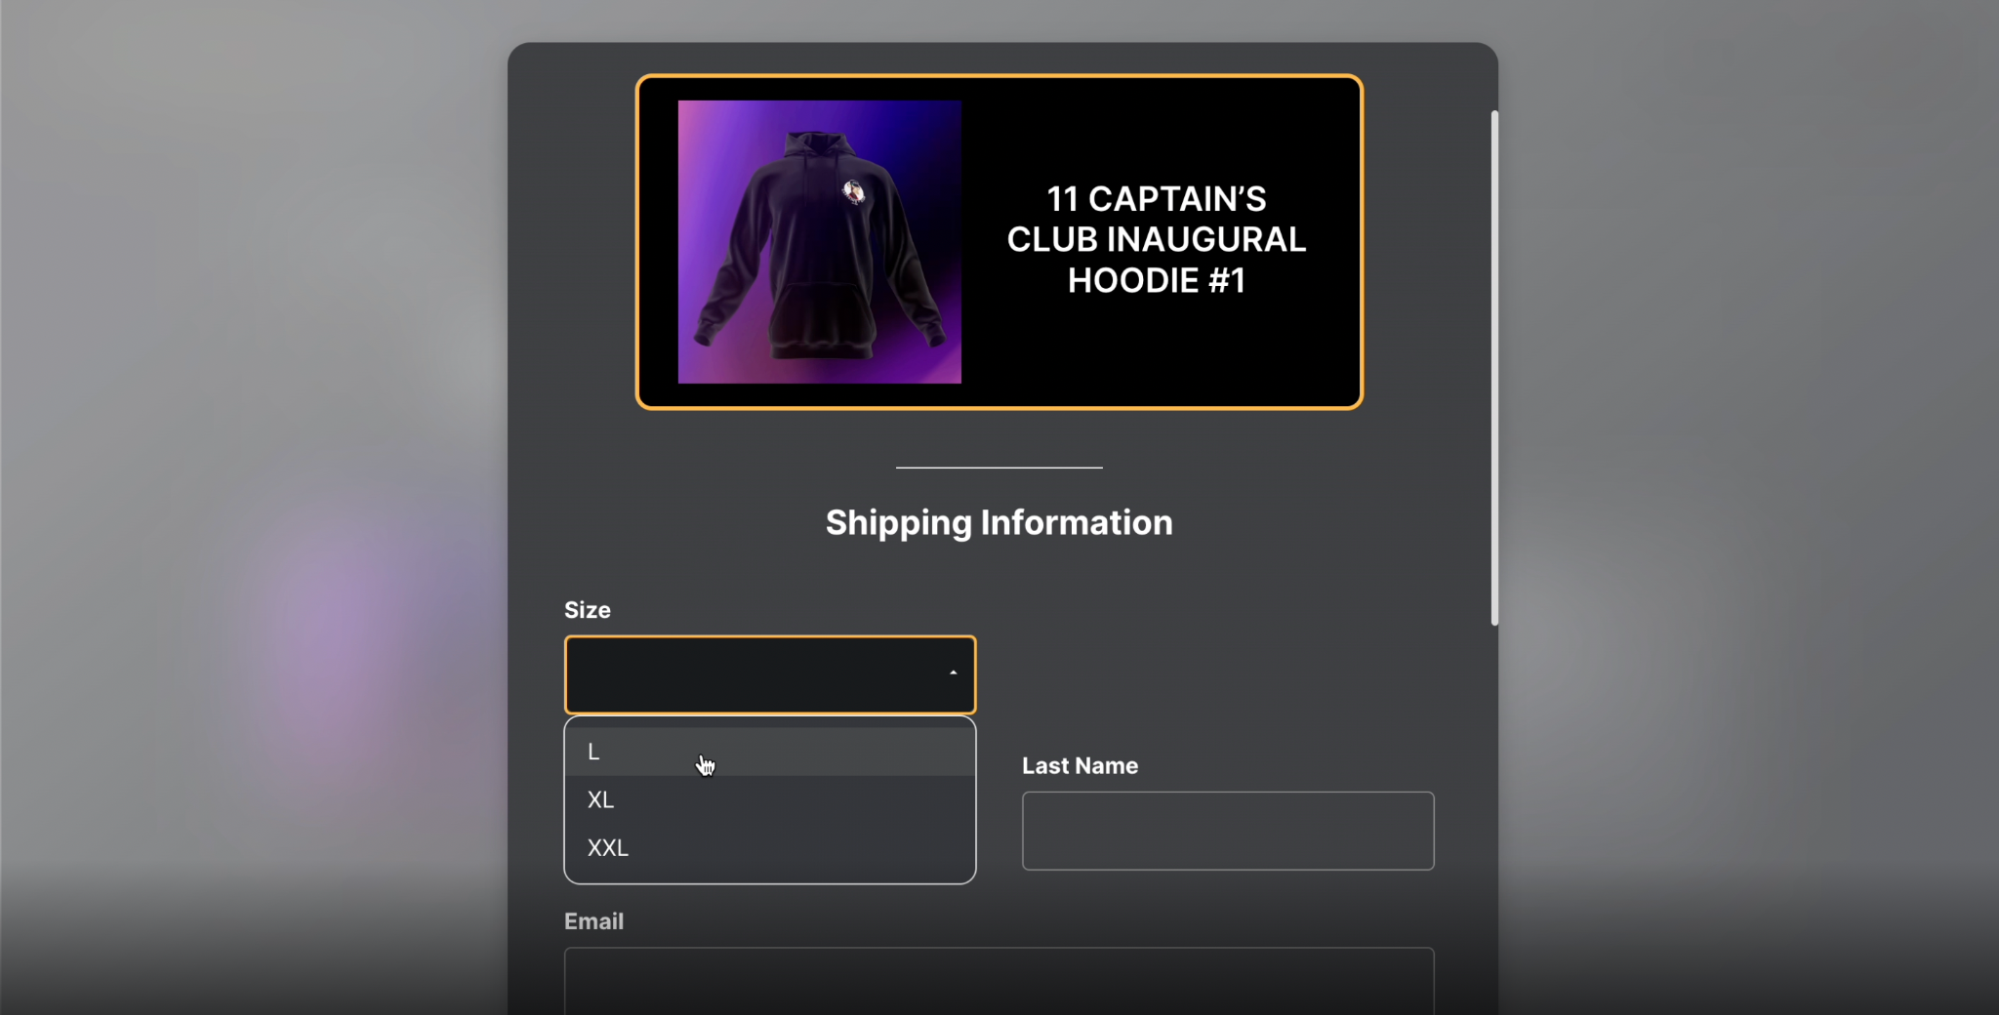 Redemption Modal for the 11 Hoodie